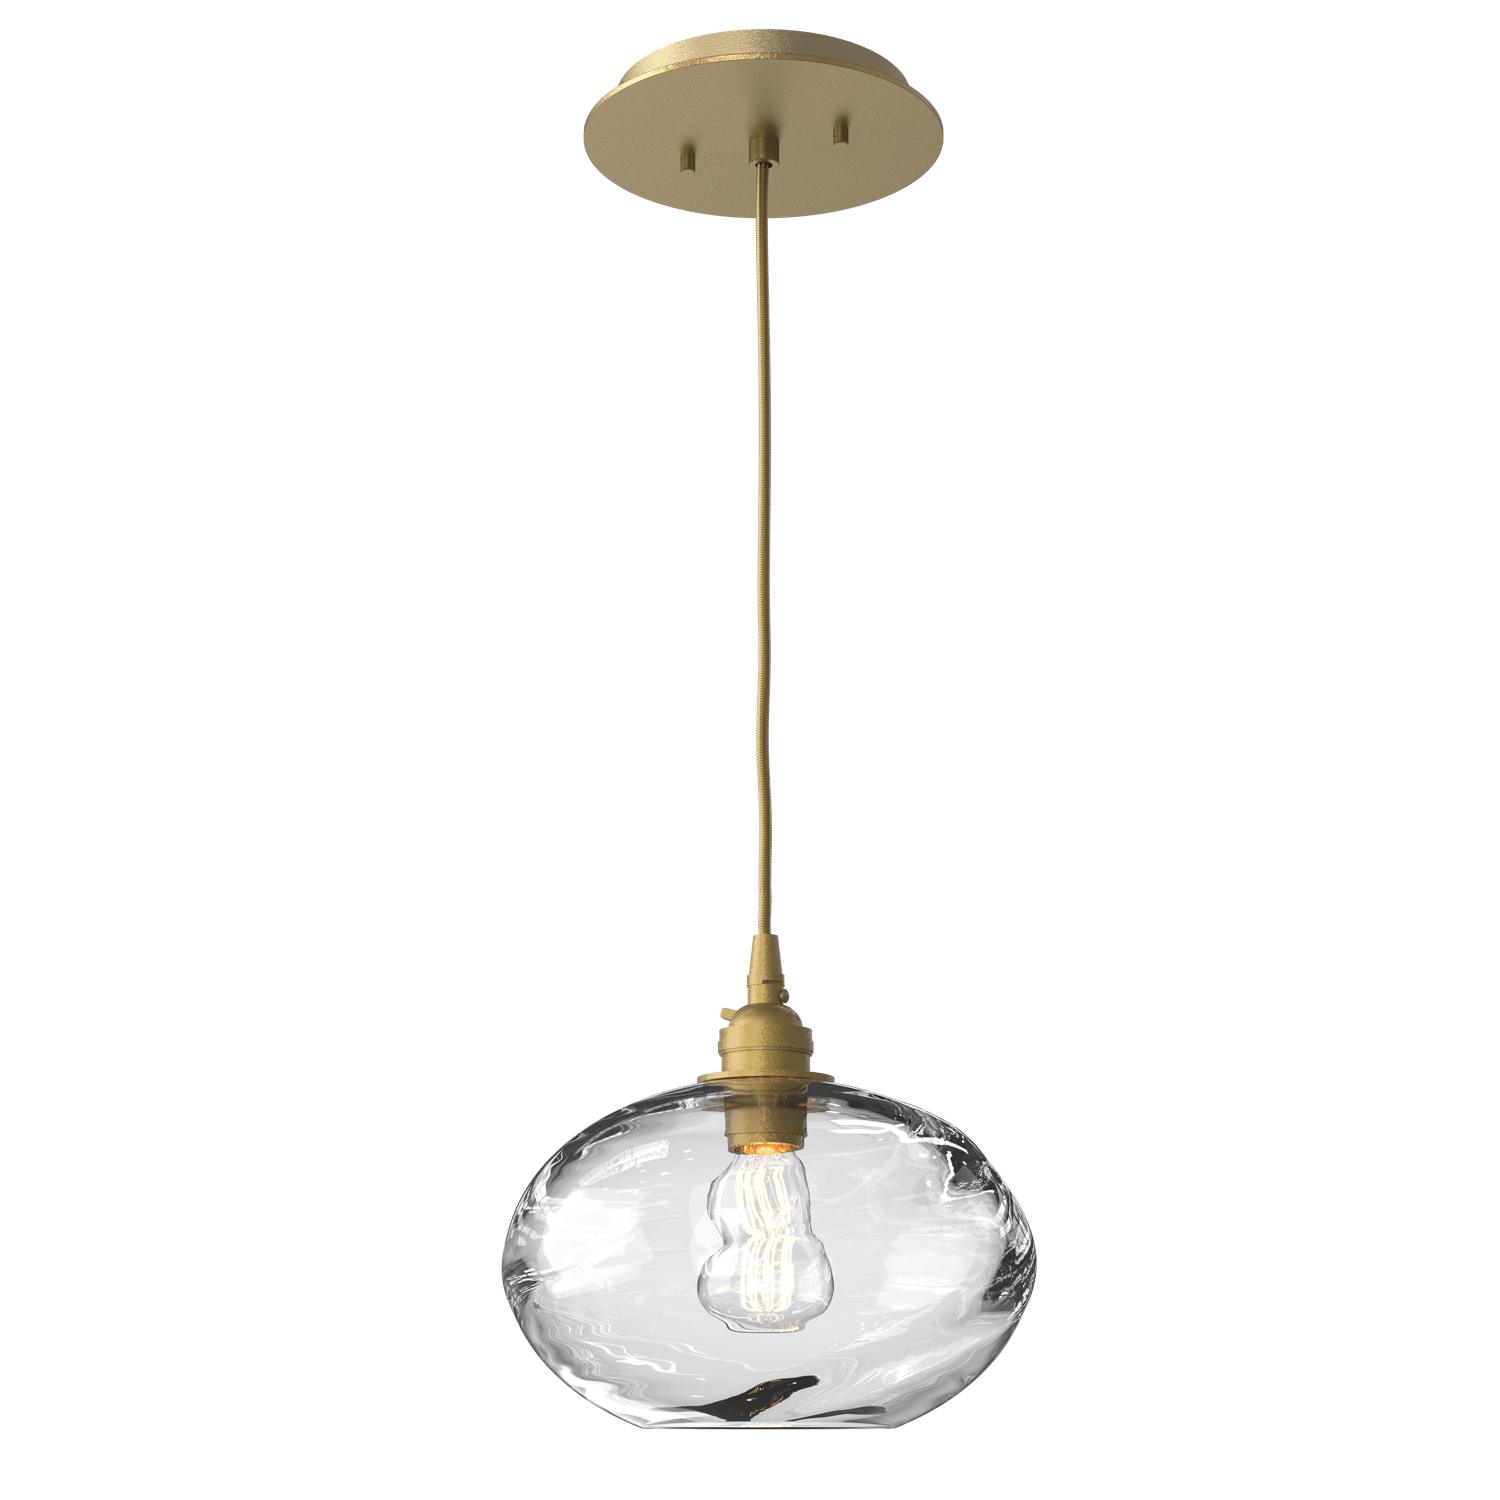 LAB0036-01-GB-OC-Hammerton-Studio-Optic-Blown-Glass-Coppa-pendant-light-with-gilded-brass-finish-and-optic-clear-blown-glass-shades-and-incandescent-lamping